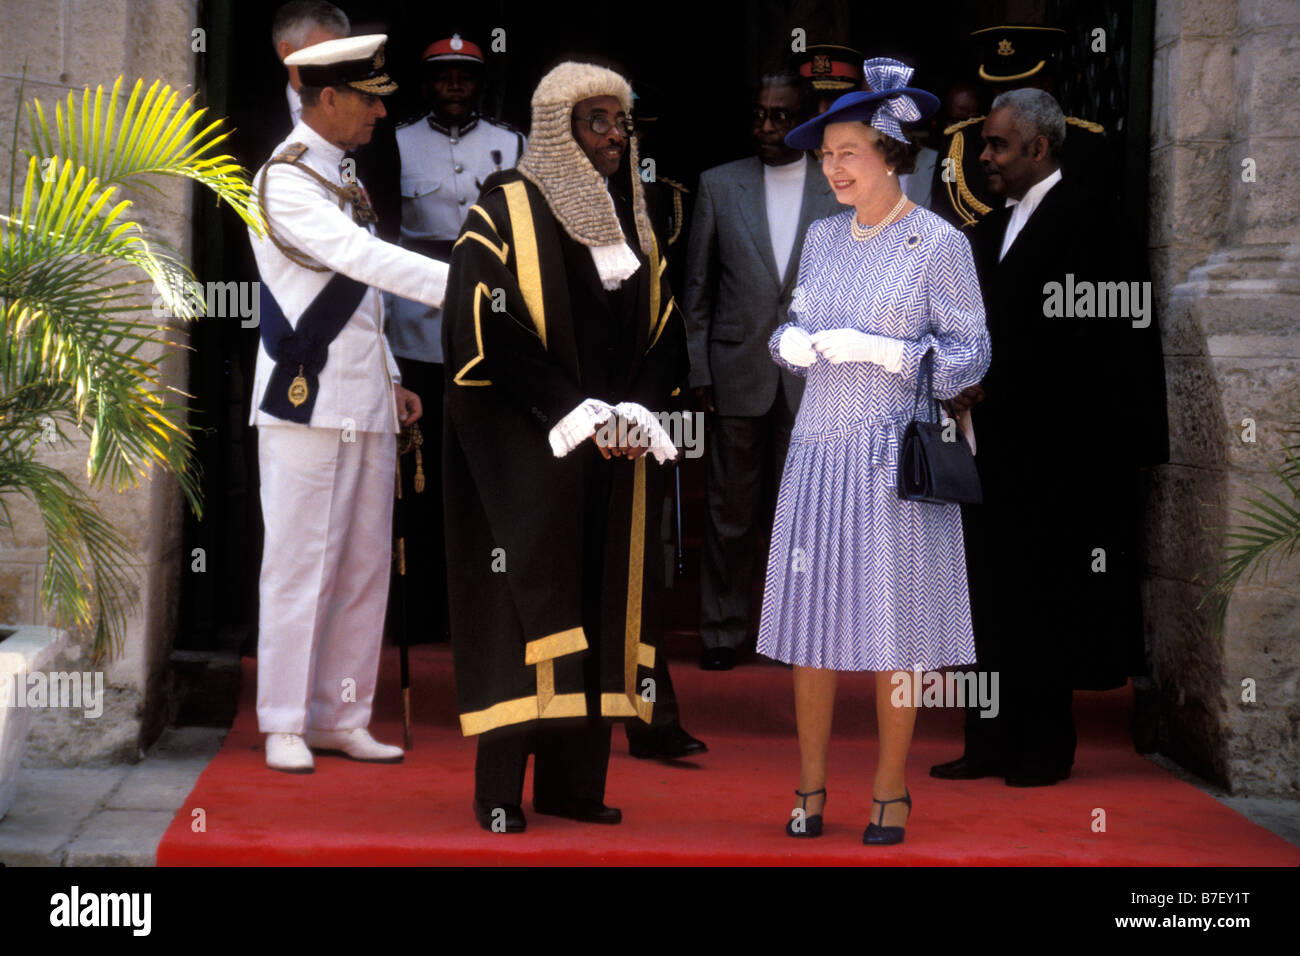 A smiling HM Queen Elizabeth II and Prince Philip accompanied by the Speaker of the House, Lawson Weekes, Barbados Parliament. Stock Photo